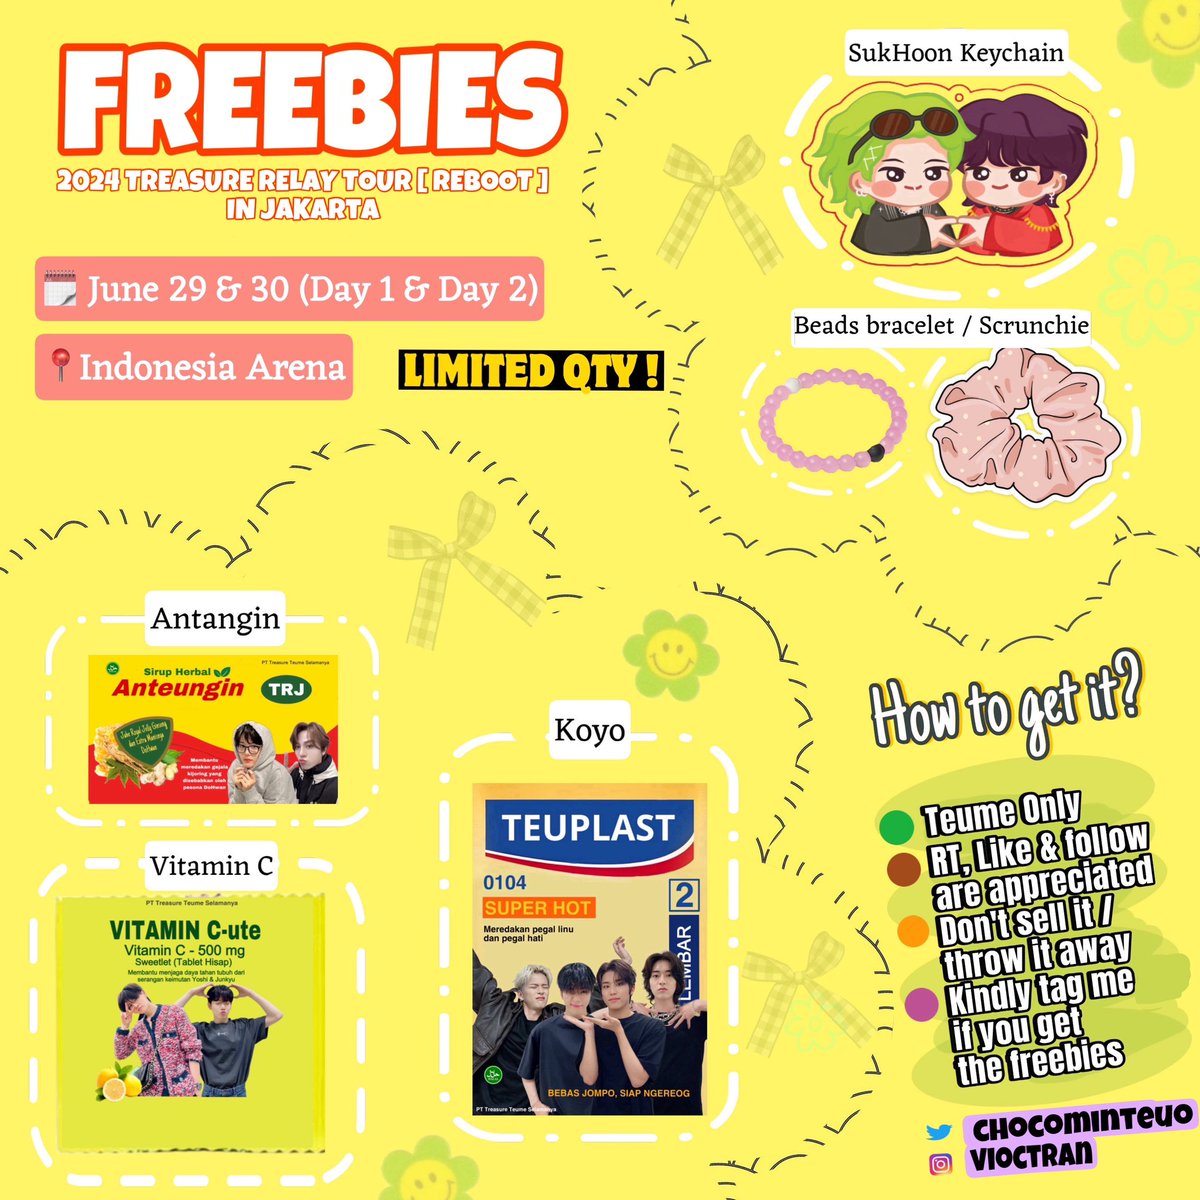 FREEBIES 2024 TREASURE RELAY TOUR [ REBOOT ] IN JAKARTA By @chocominteuo 🗓️ June 29 & 30 [Day 1 & 2] 📍 INDONESIA ARENA, GBK 🕒 TBA Get yours : SukHoon Keychain, Beads Bracelet/Scrunchie, Antangin, Koyo & Vitamin C For limited qty ⚠️ #TREASURE_REBOOT_IN_JAKARTA #TREASURE